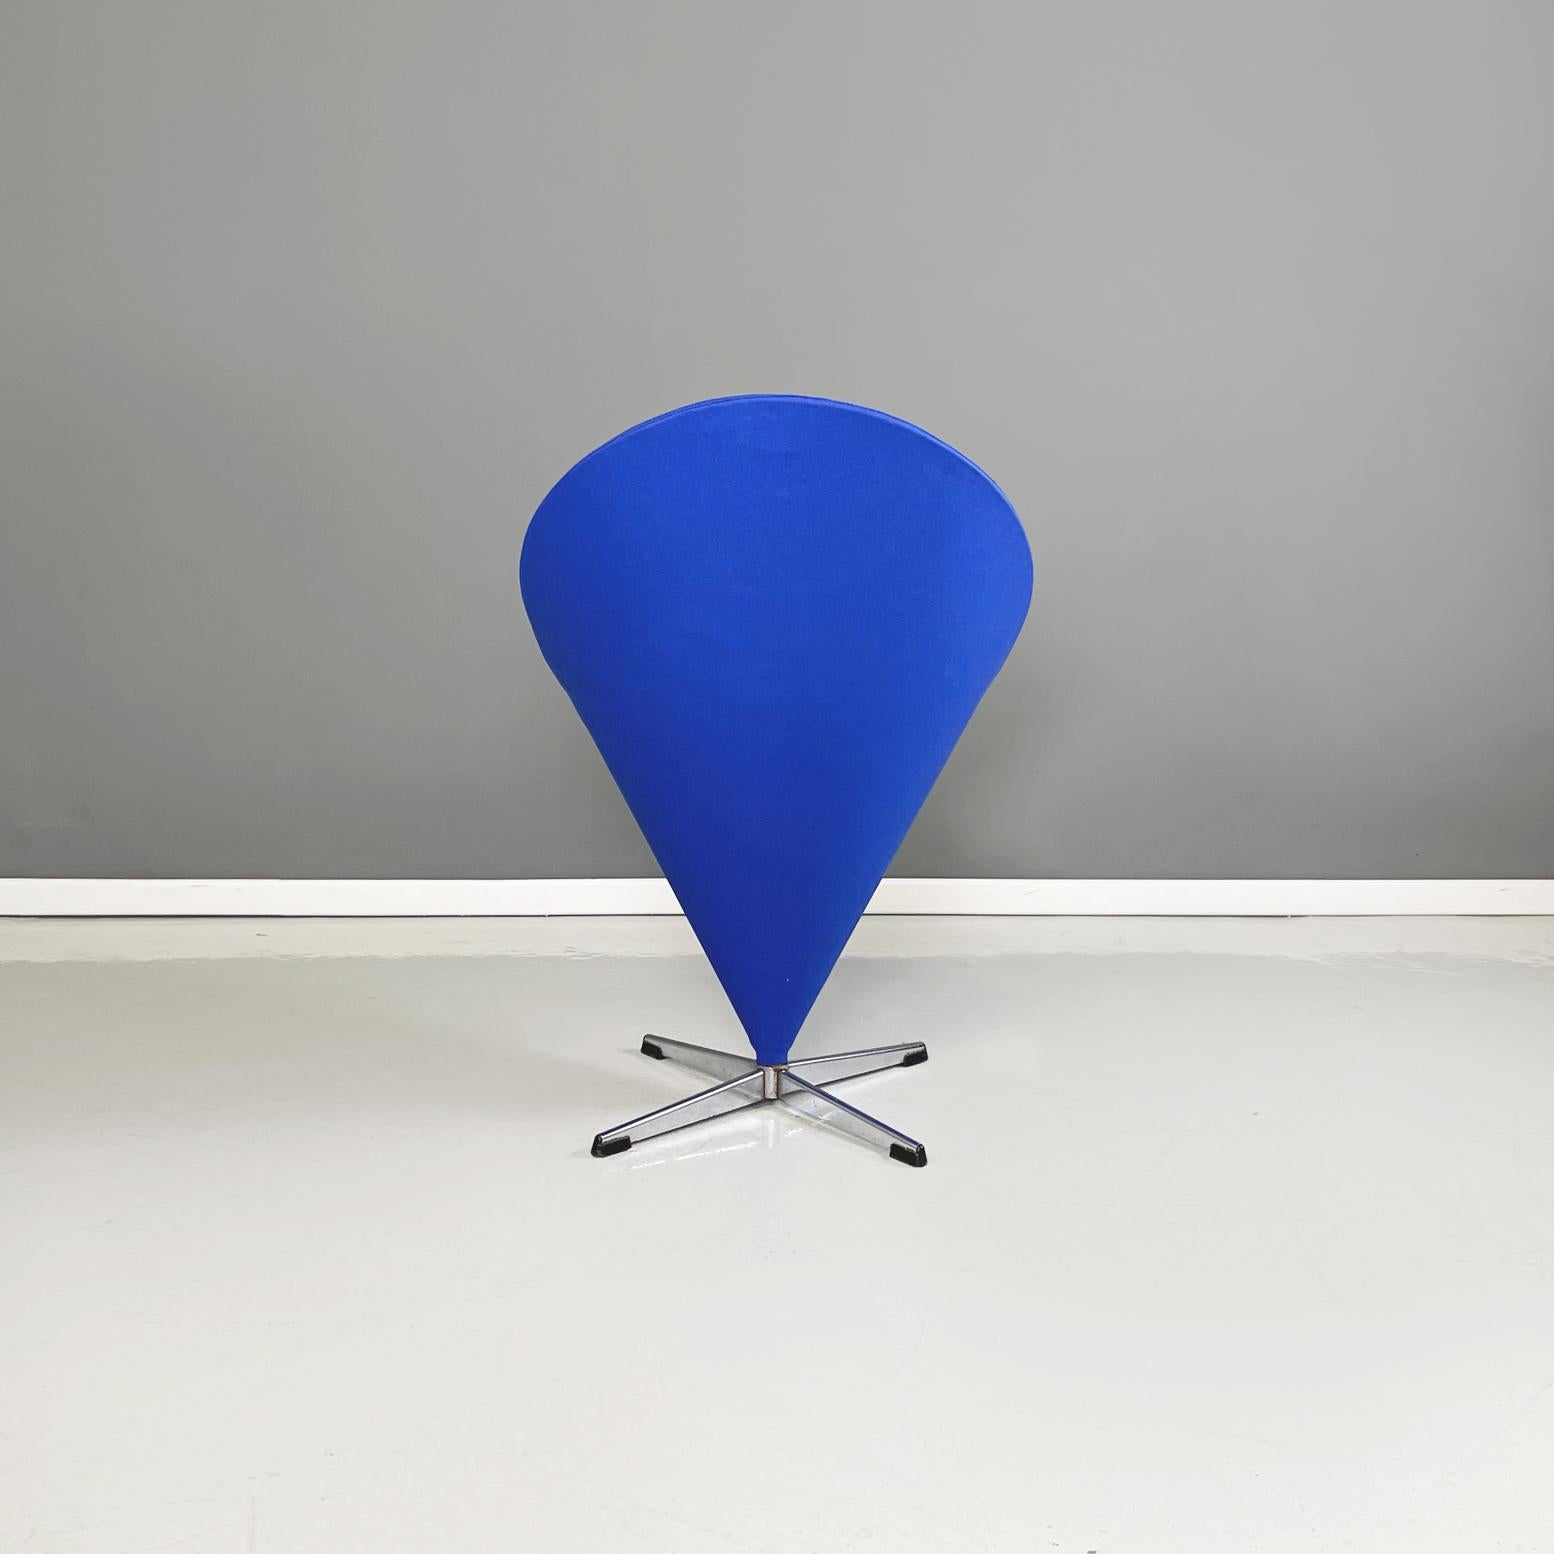 Late 20th Century Italian Midcentury Swivel Armchair Cone Chair by Verner Panton for Vitra, 1958